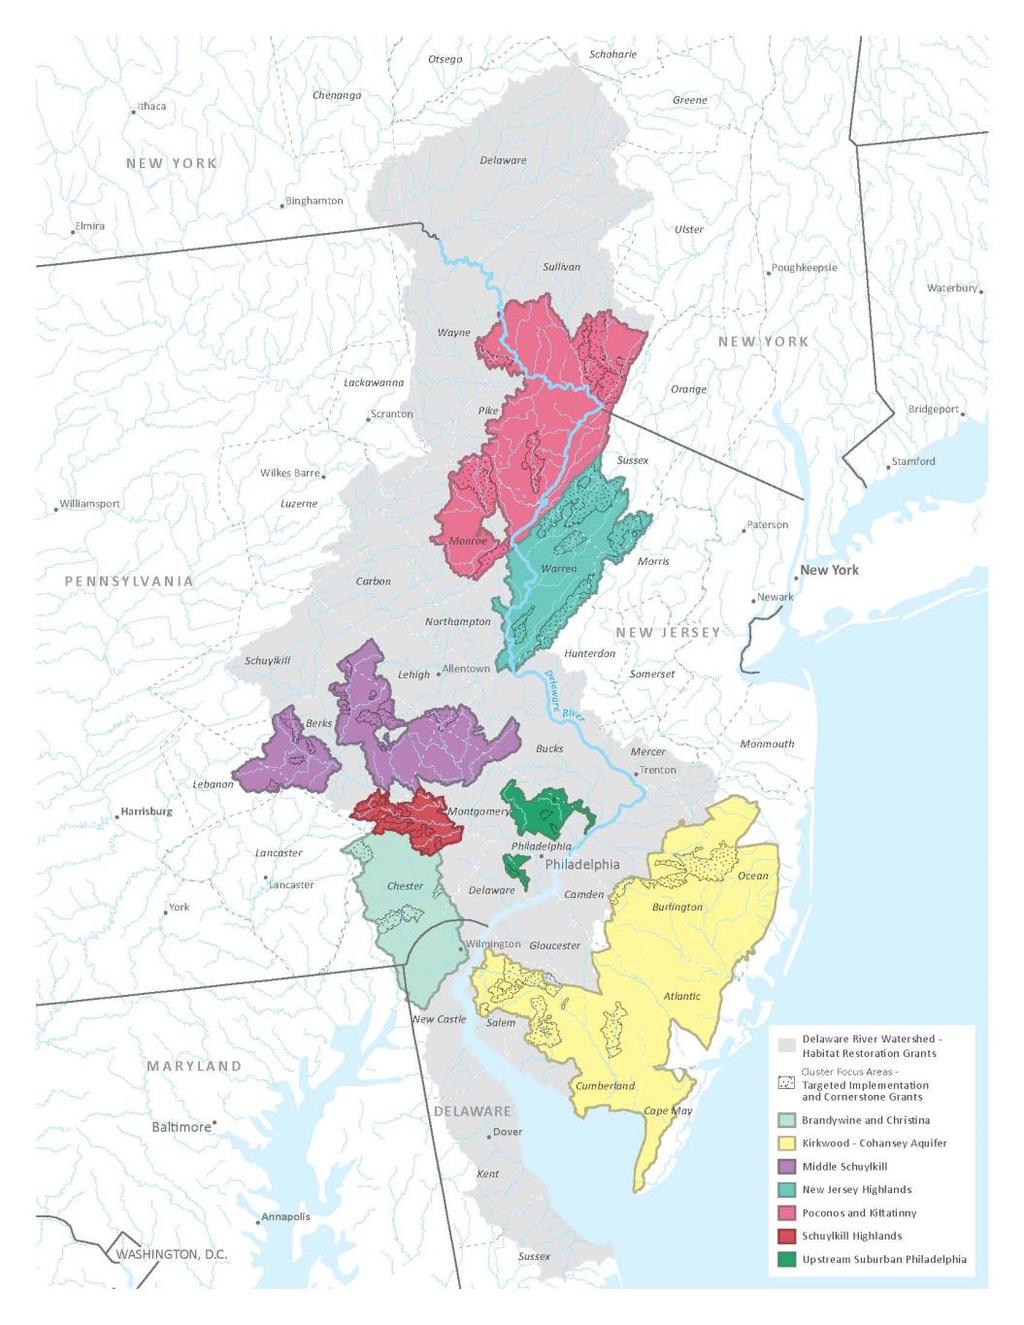 Annual grant program for restoration in the Delaware River watershed > $2 million